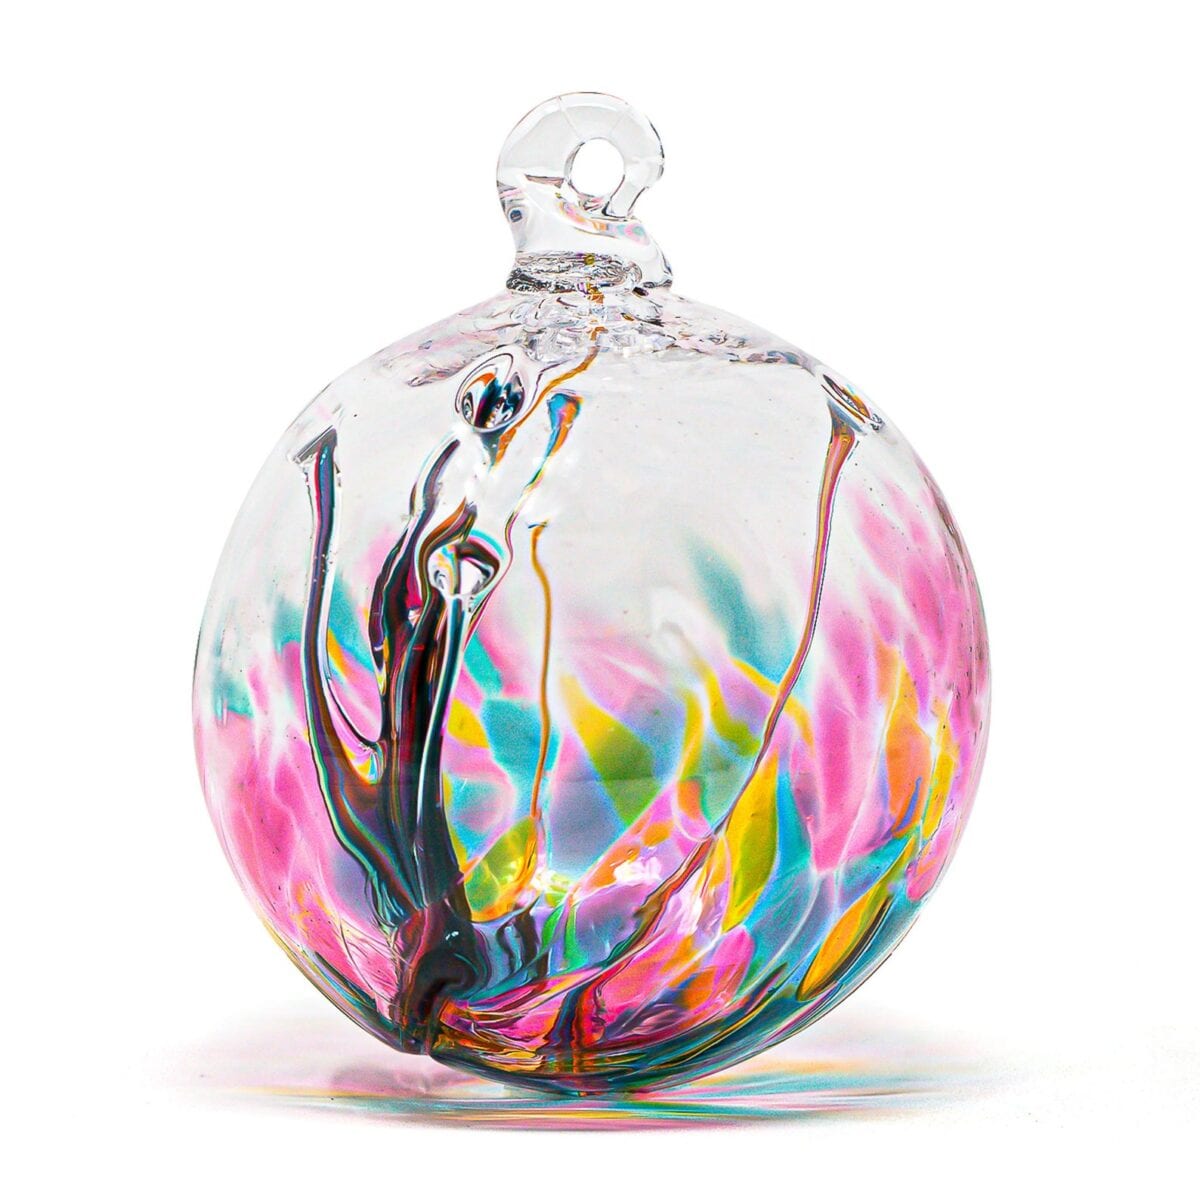 This Glass Magic Wish Ball May Just Be The Thing We Need To Make 2020